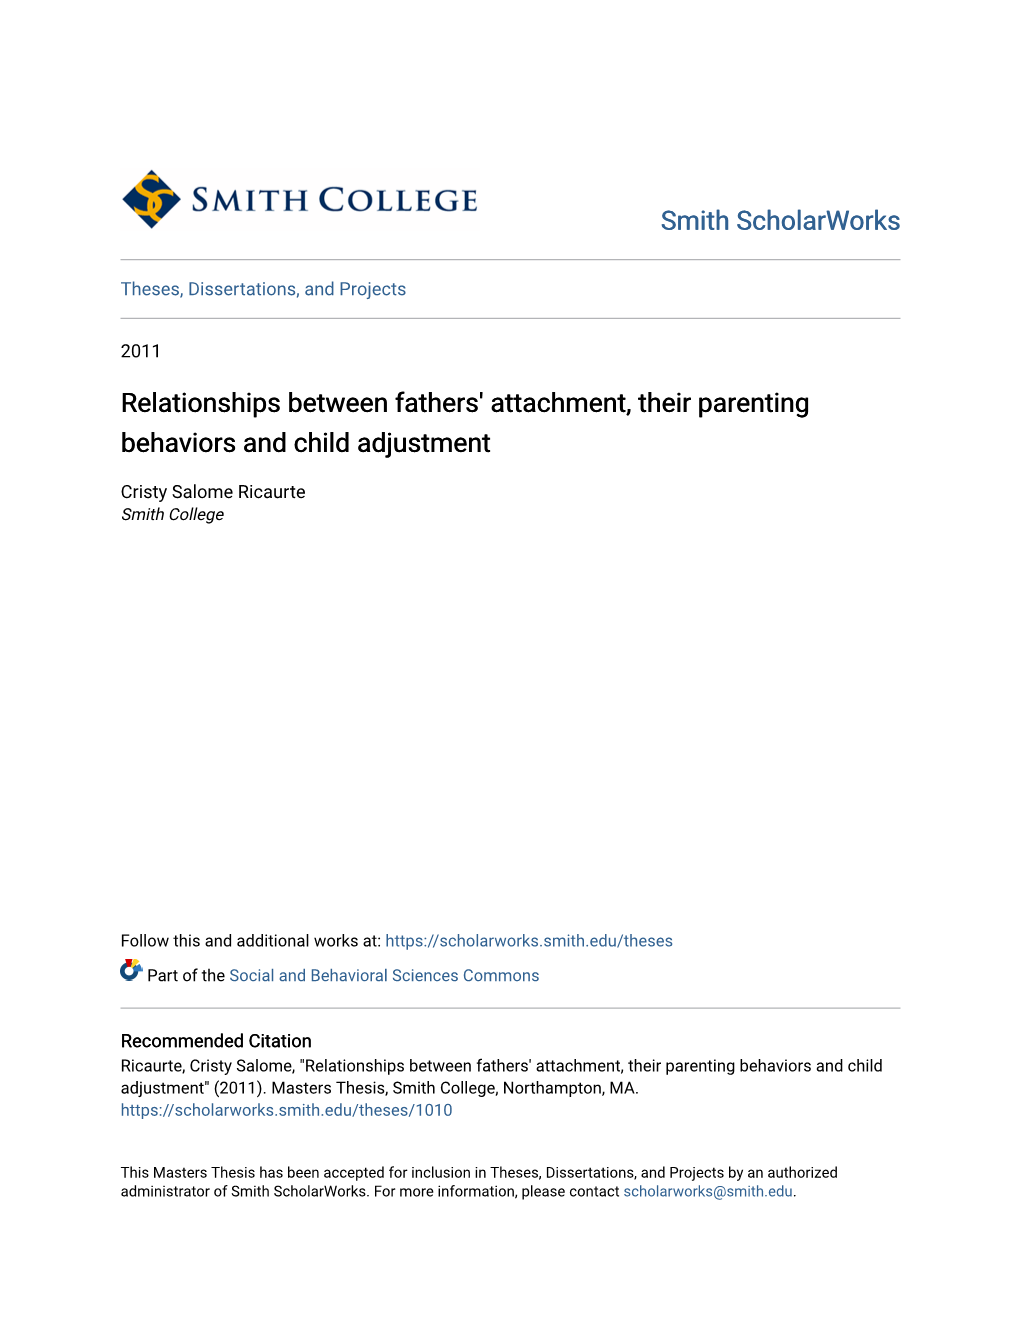 Relationships Between Fathers' Attachment, Their Parenting Behaviors and Child Adjustment